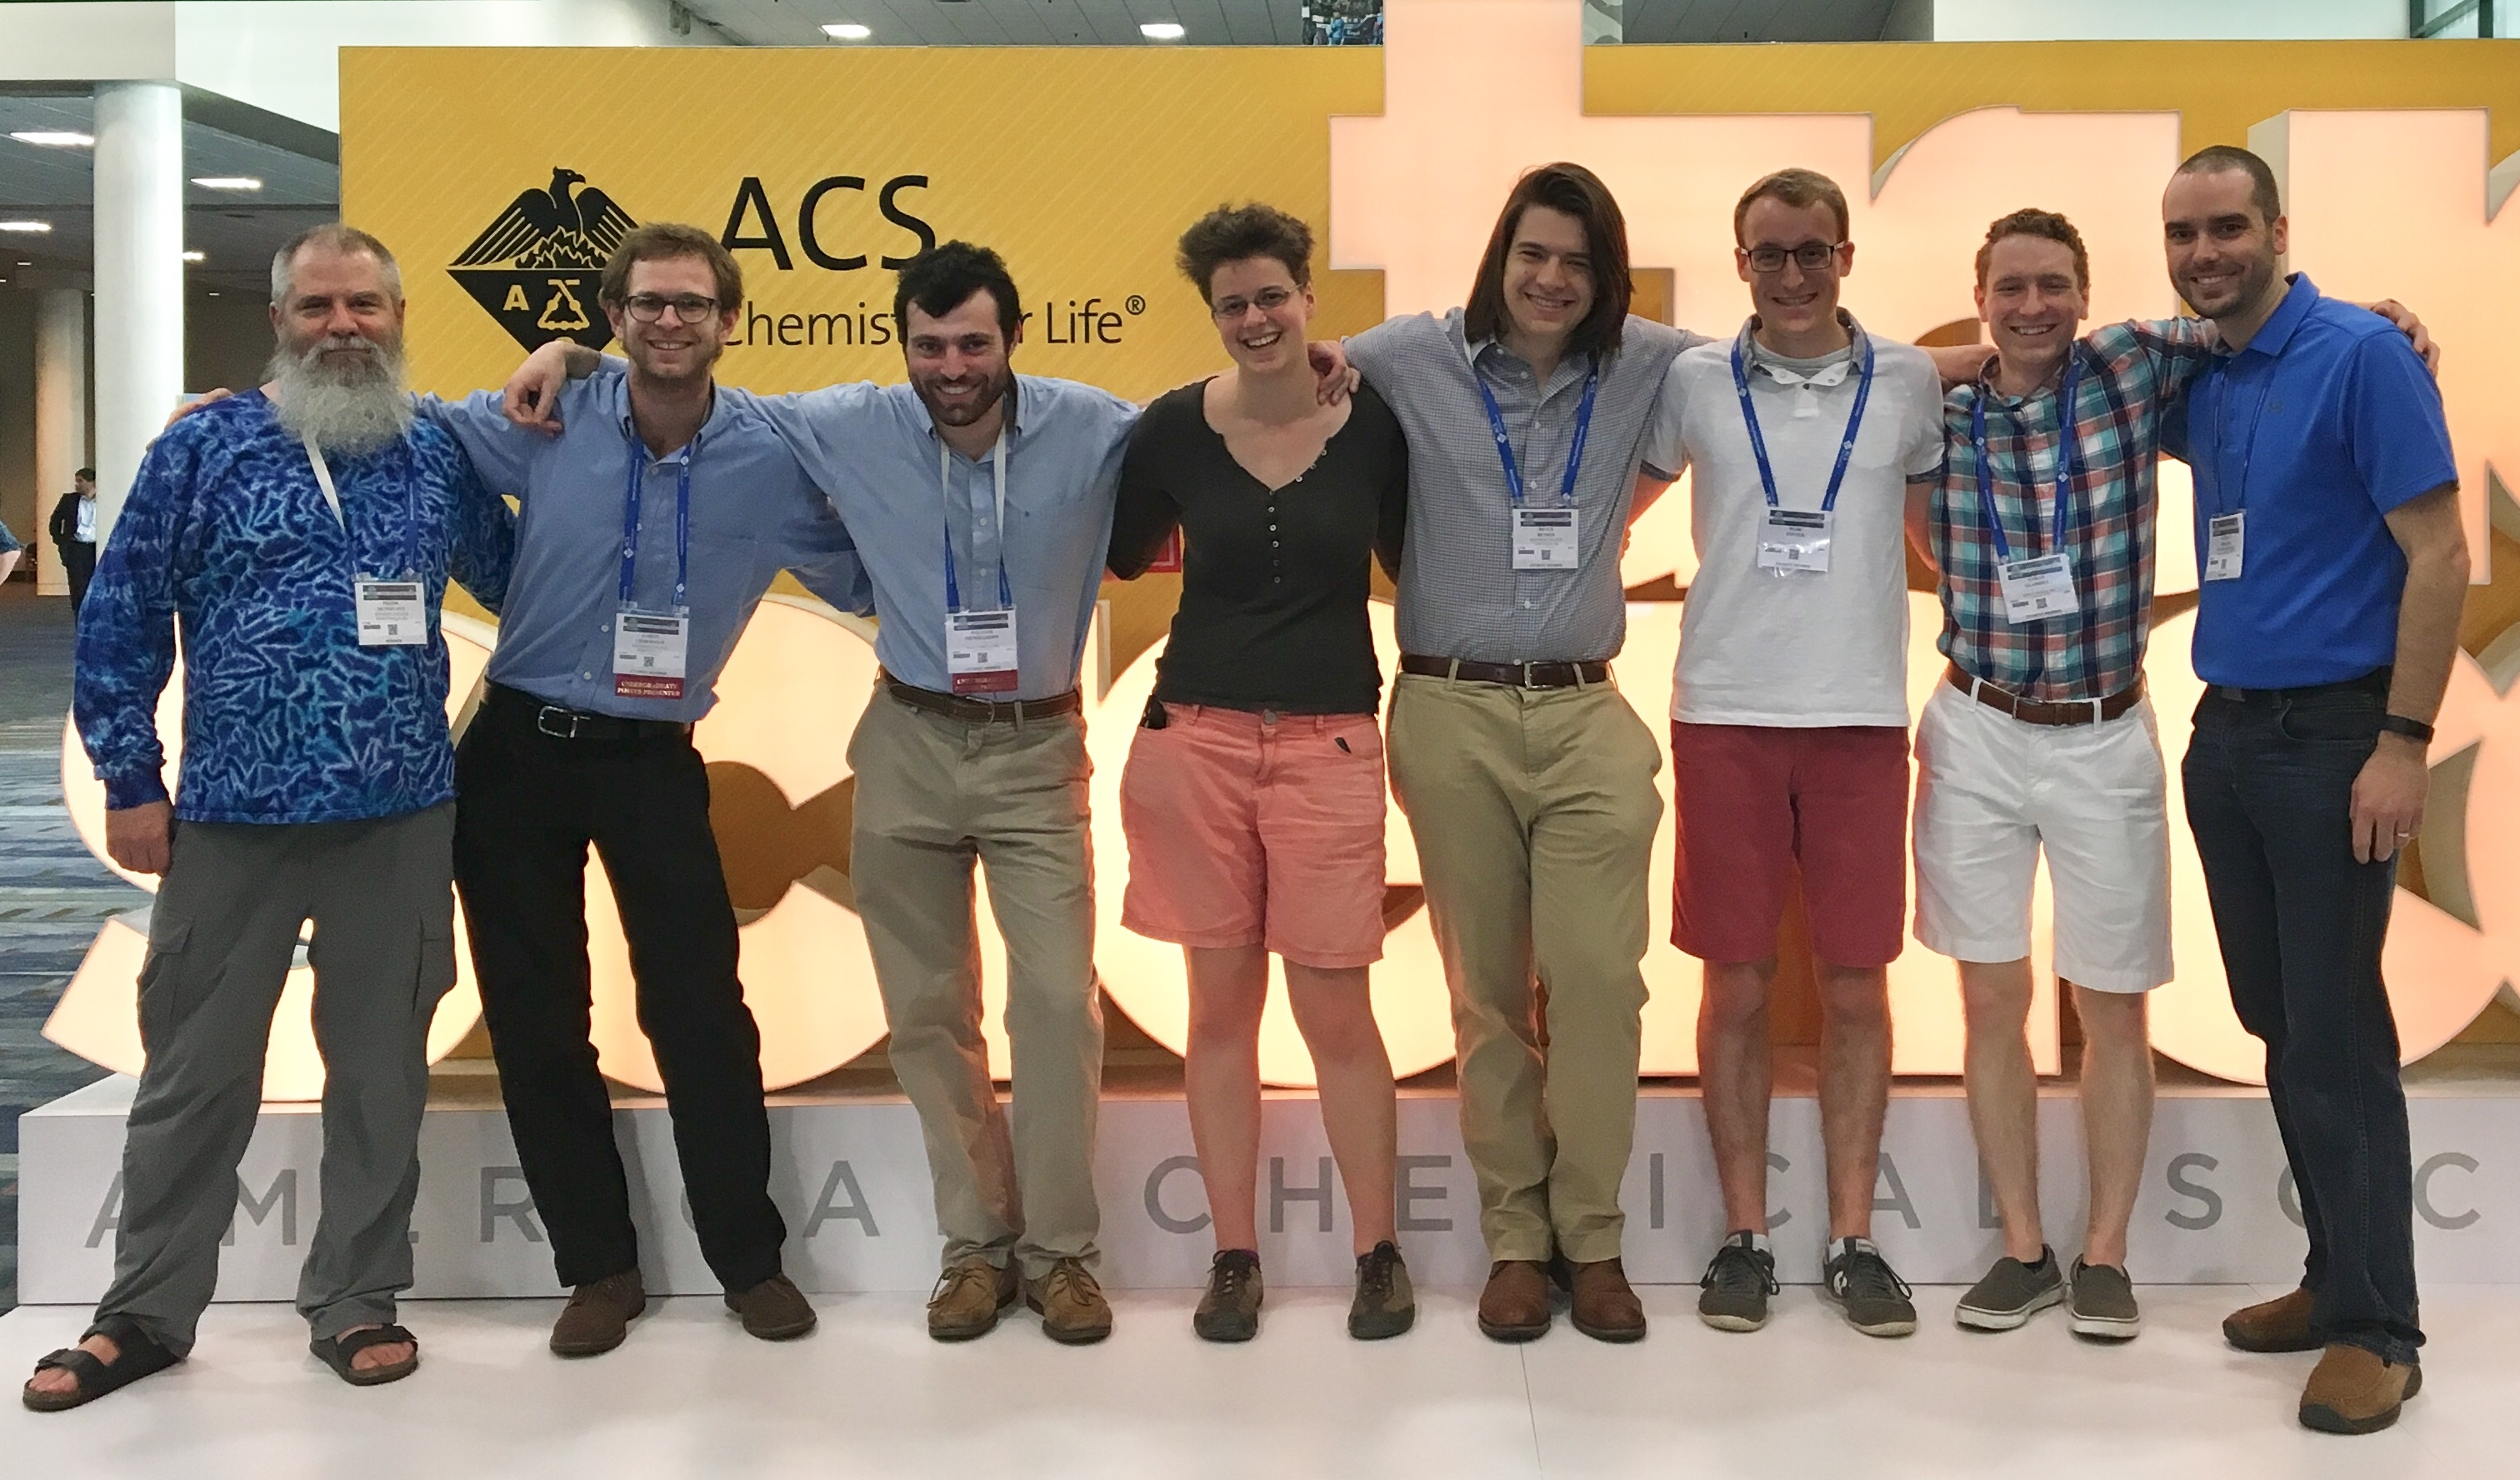 Whitman Chemistry students and faculty at the 2018 ACS Meeting in New Orleans